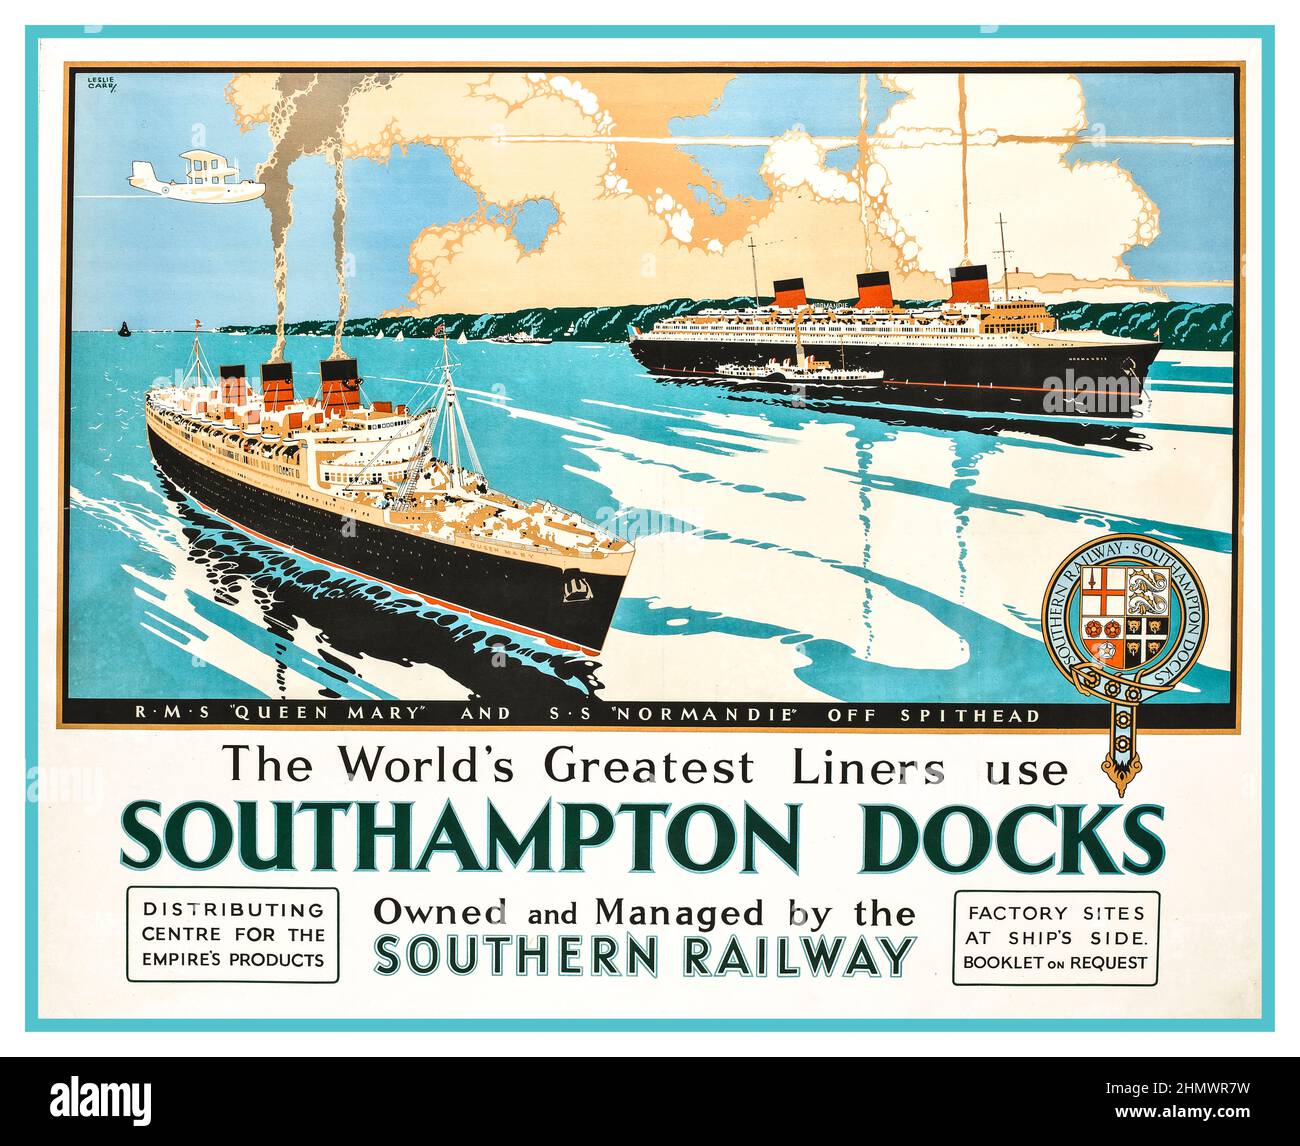 1938 Southampton Docks Southern Railway Vintage Illustration Poster. 1930s with the R.M.S. Queen Mary, and the S.S. Normandie off Spithead, 'The World's Greatest Liners use Southampton Docks,'  (owned and managed by Southern Railway) artist Leslie Carr Stock Photo